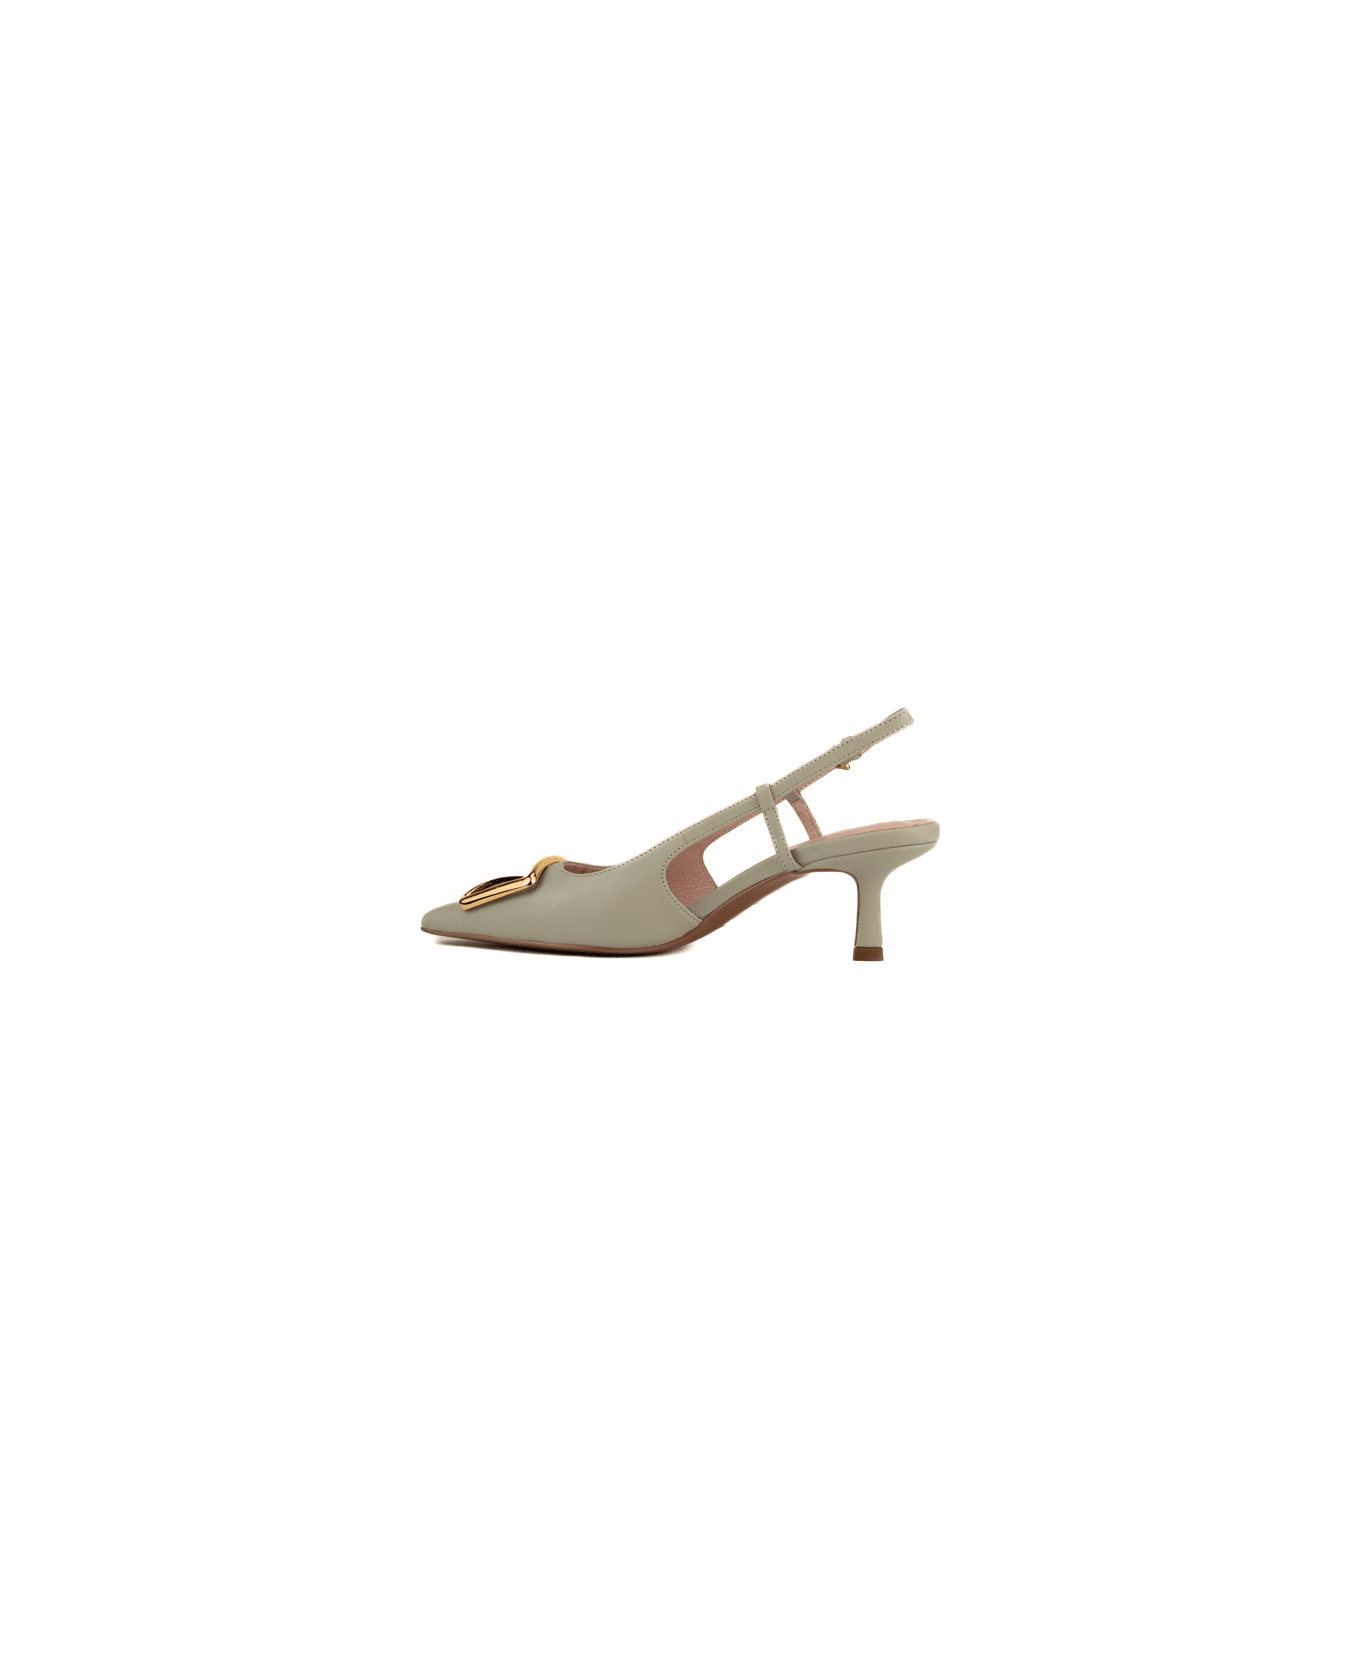 Coccinelle Leather Pumps With Stiletto Heel - Celadon green